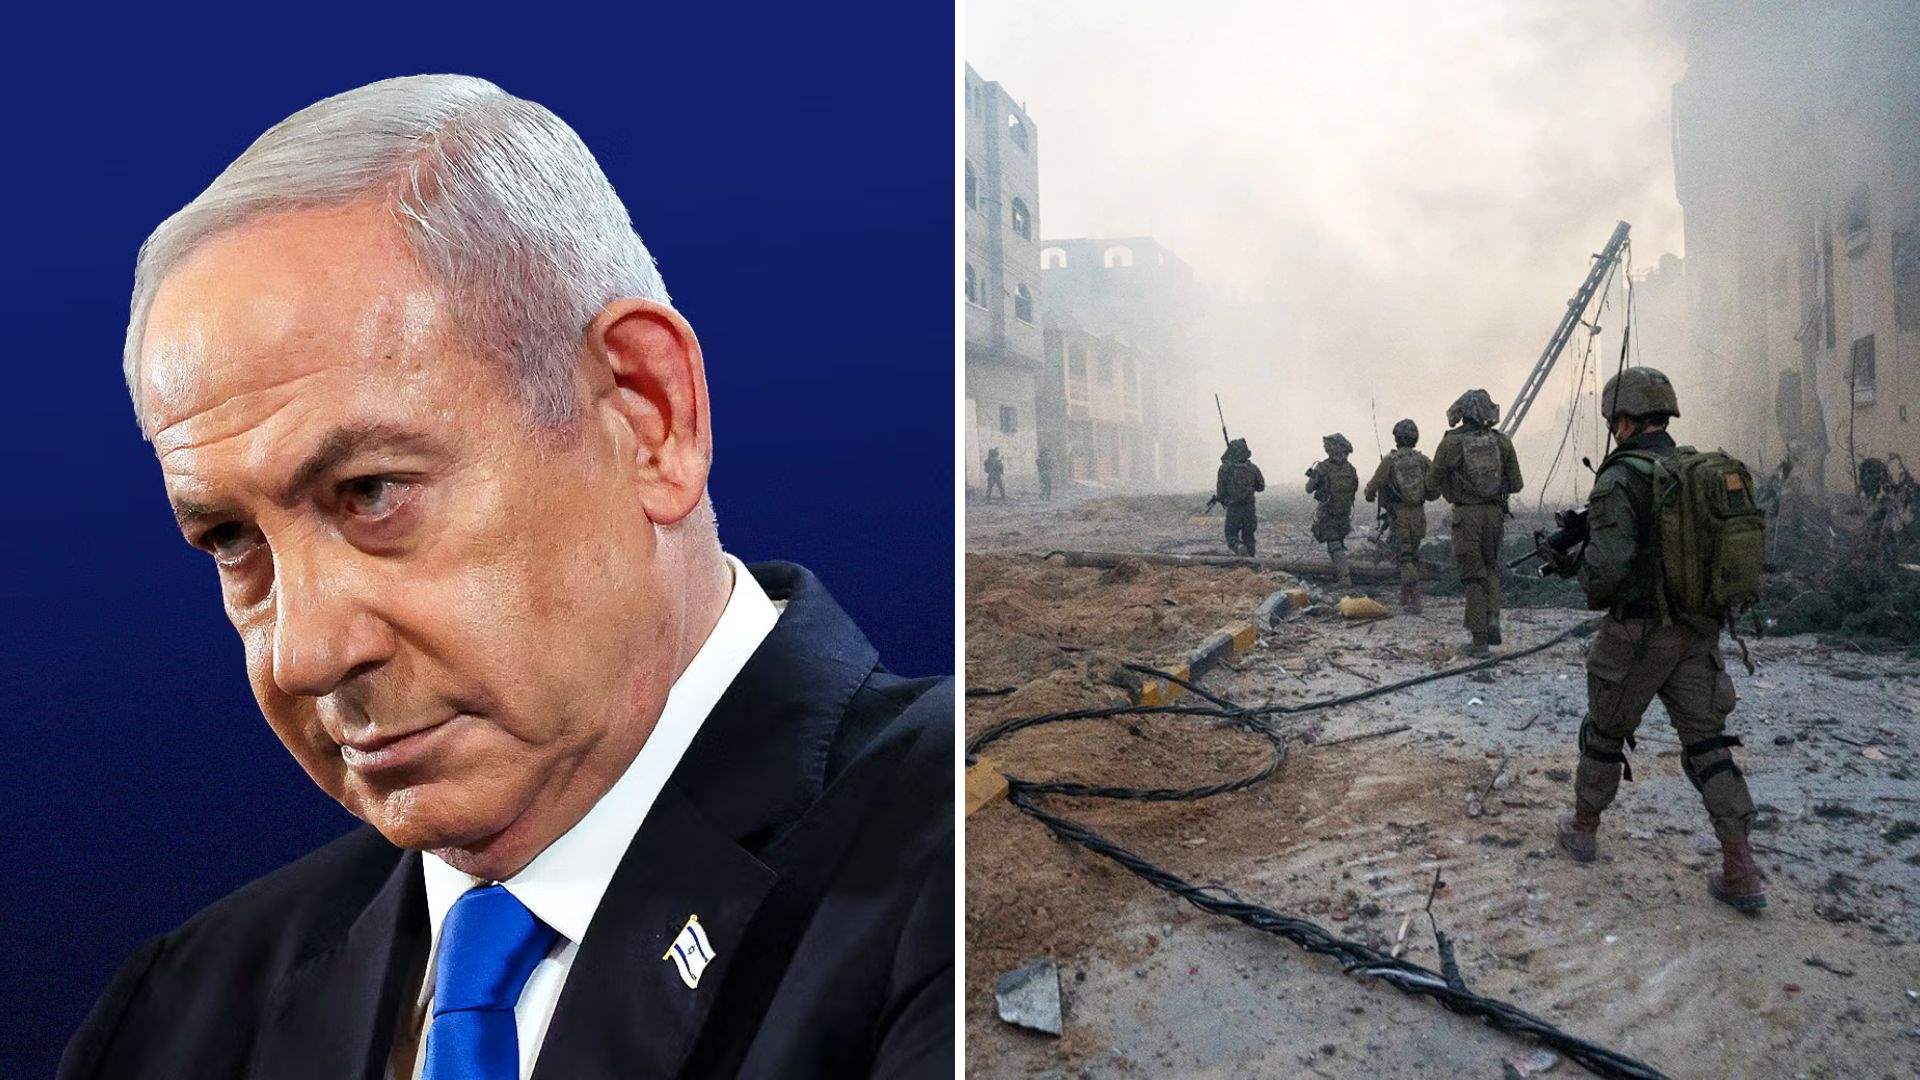 #Netanyahu&#39;s hostage deal faces political hurdles over Gaza withdrawal plan